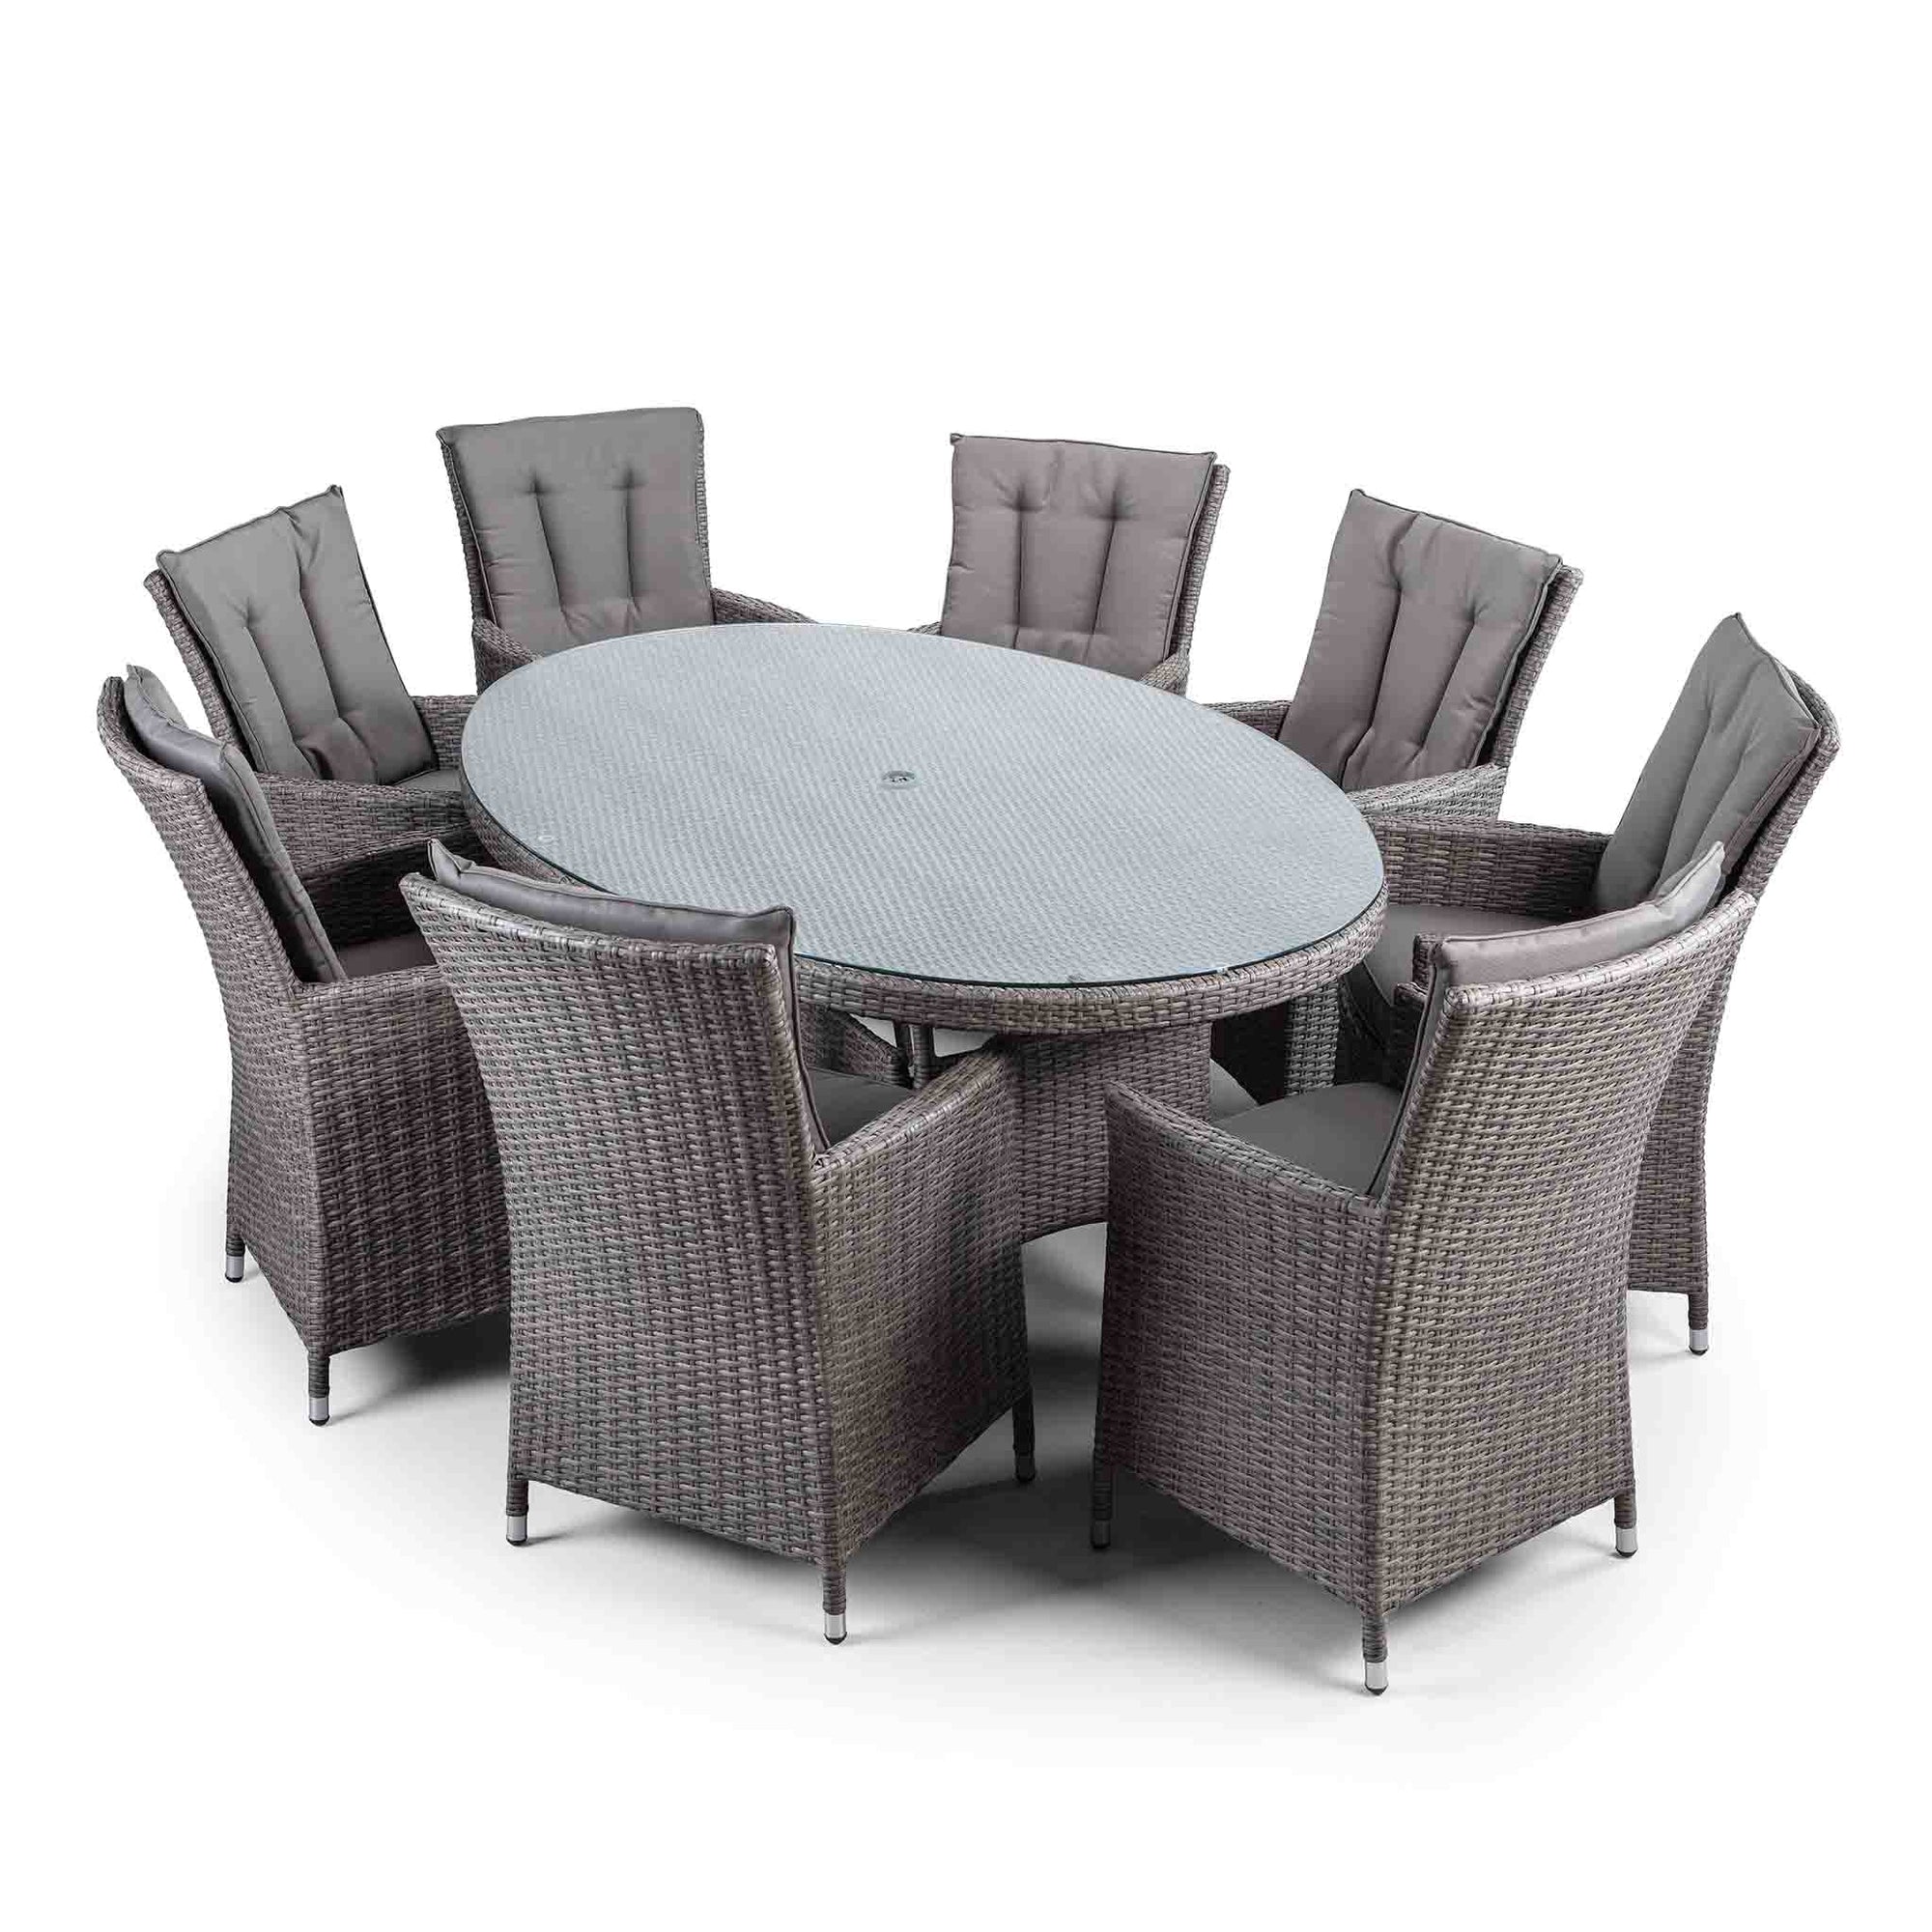 Cadiz Round Grey Rattan Dining Table And Chairs With Glass Top 8 Seater Al Fresco Outdoor Patio Garden Furniture Set Roseland Furniture